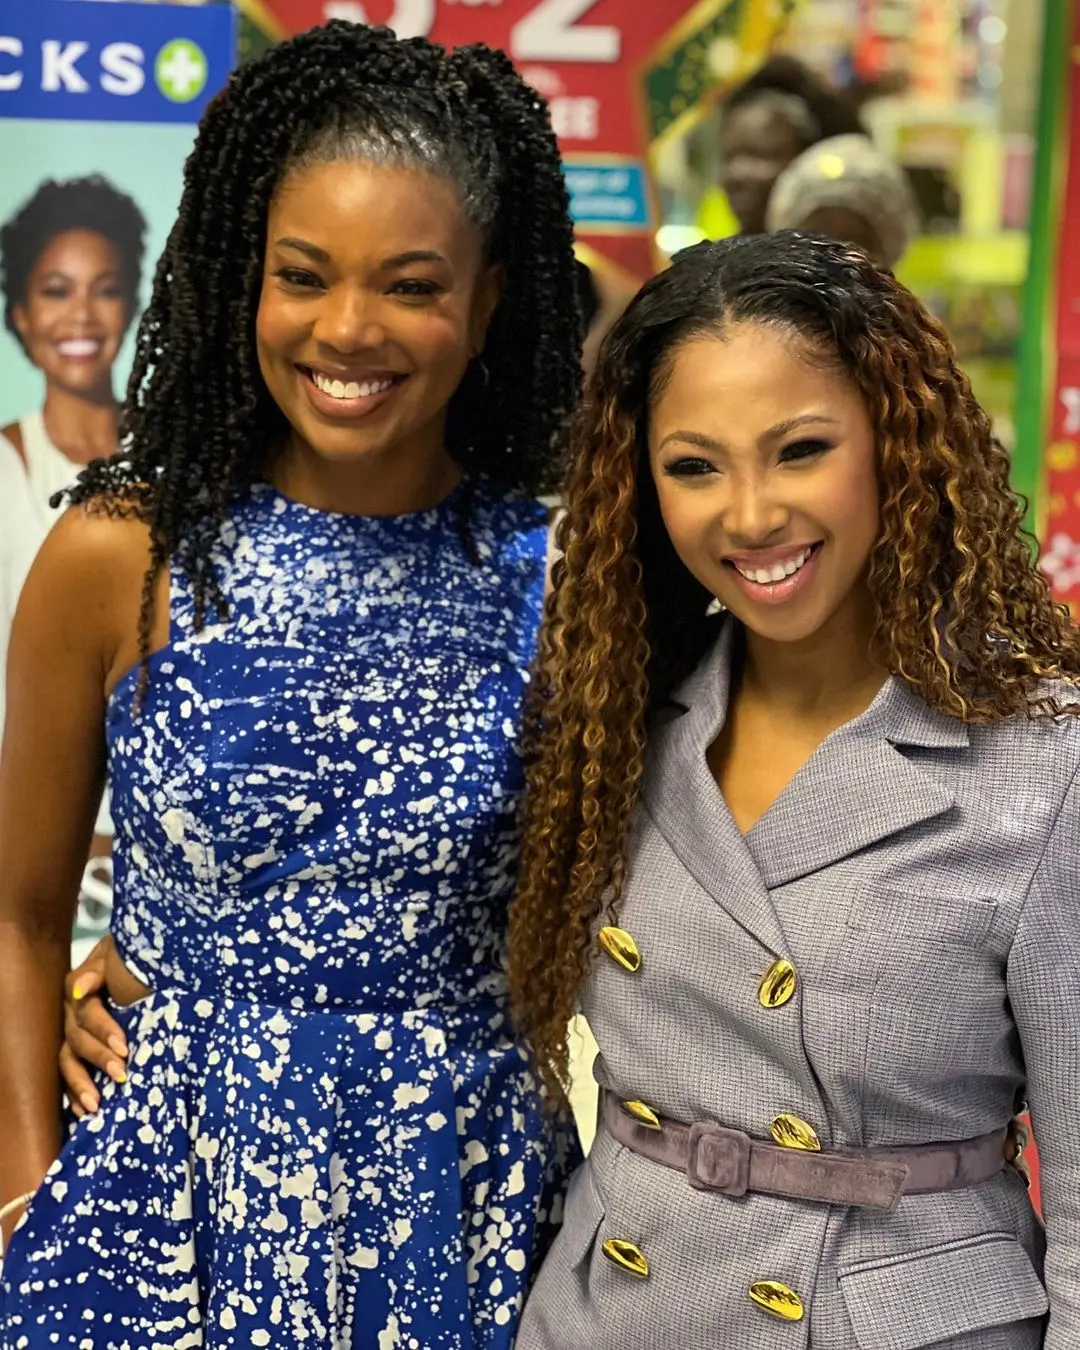 Actress Enhle Mbali shares cute moment with American star, Gabrielle Union – Photos